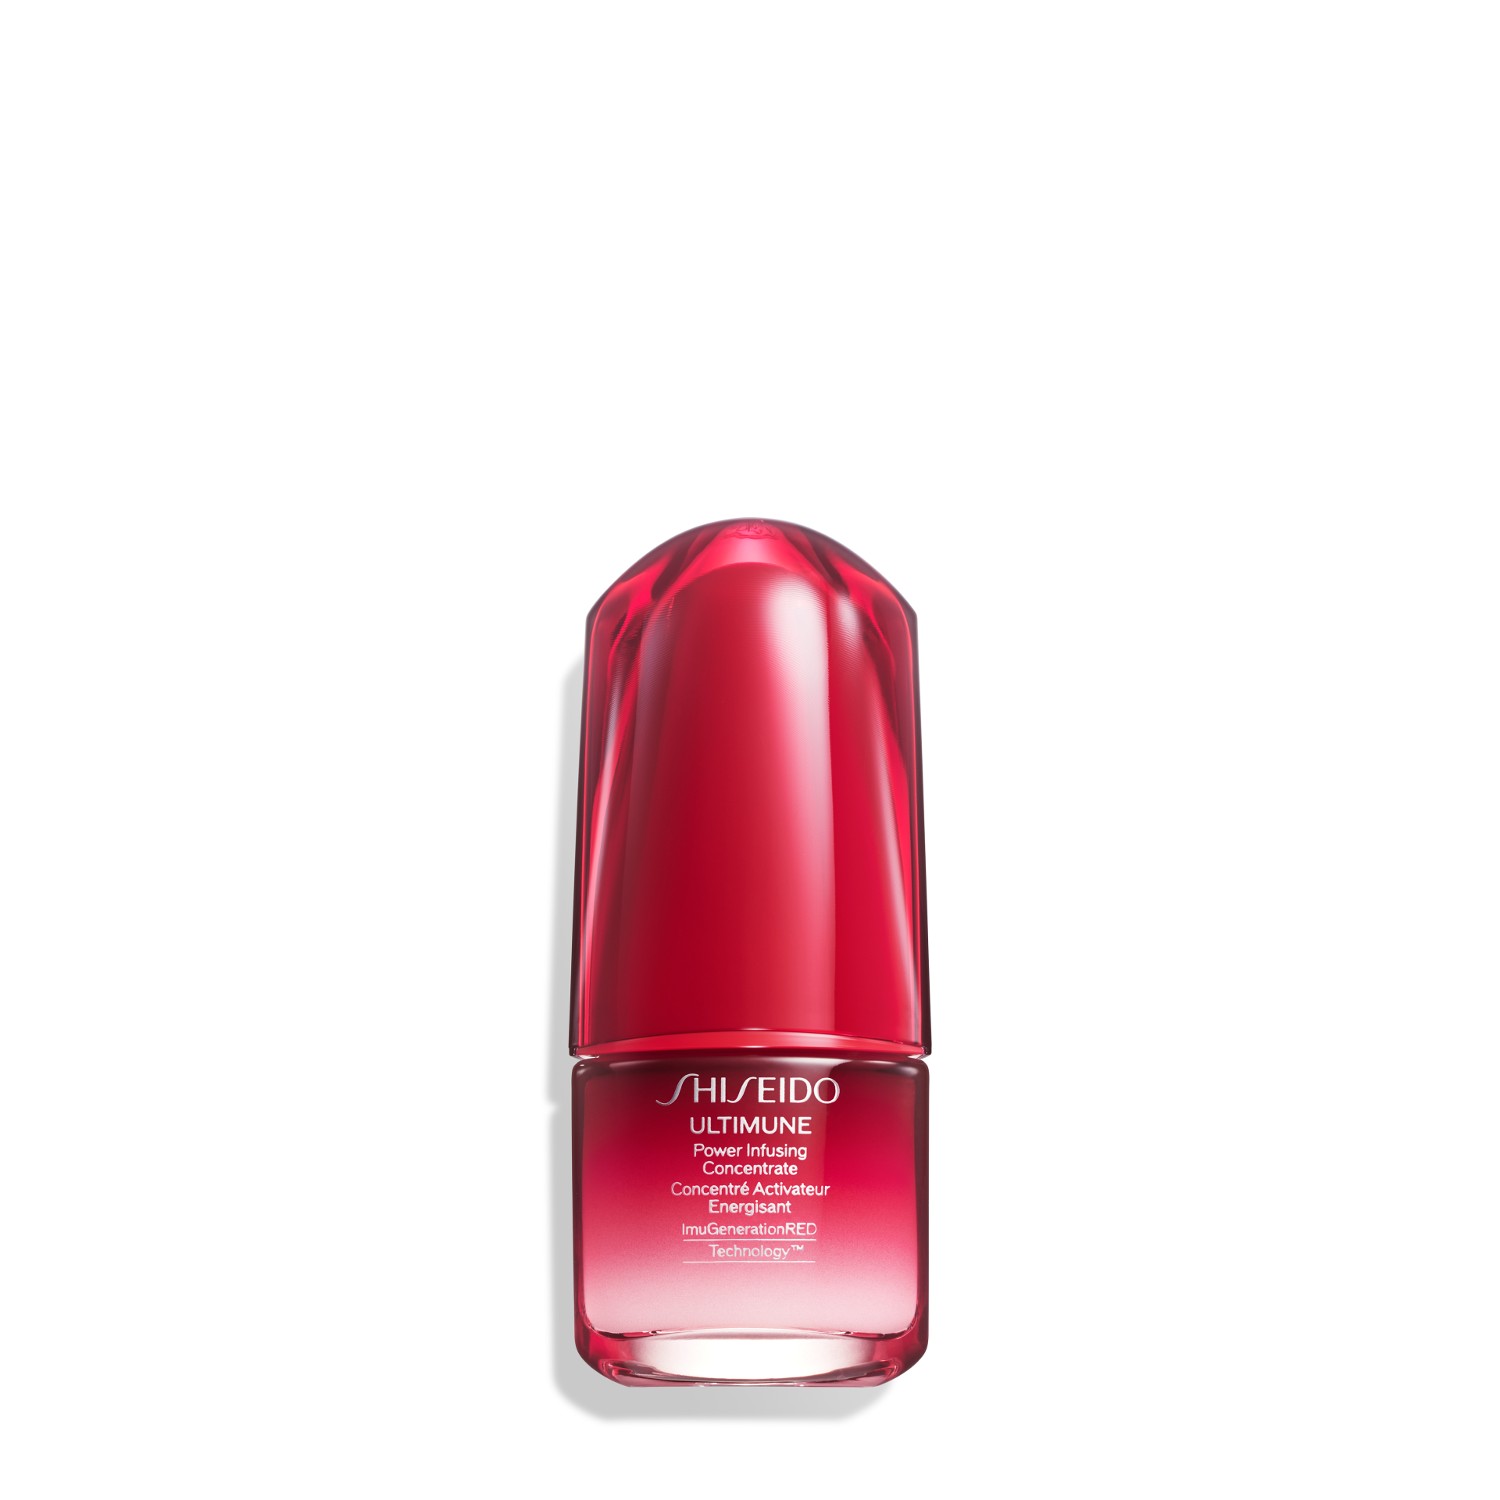 Shiseido-Serum Power Infusing Concentrate